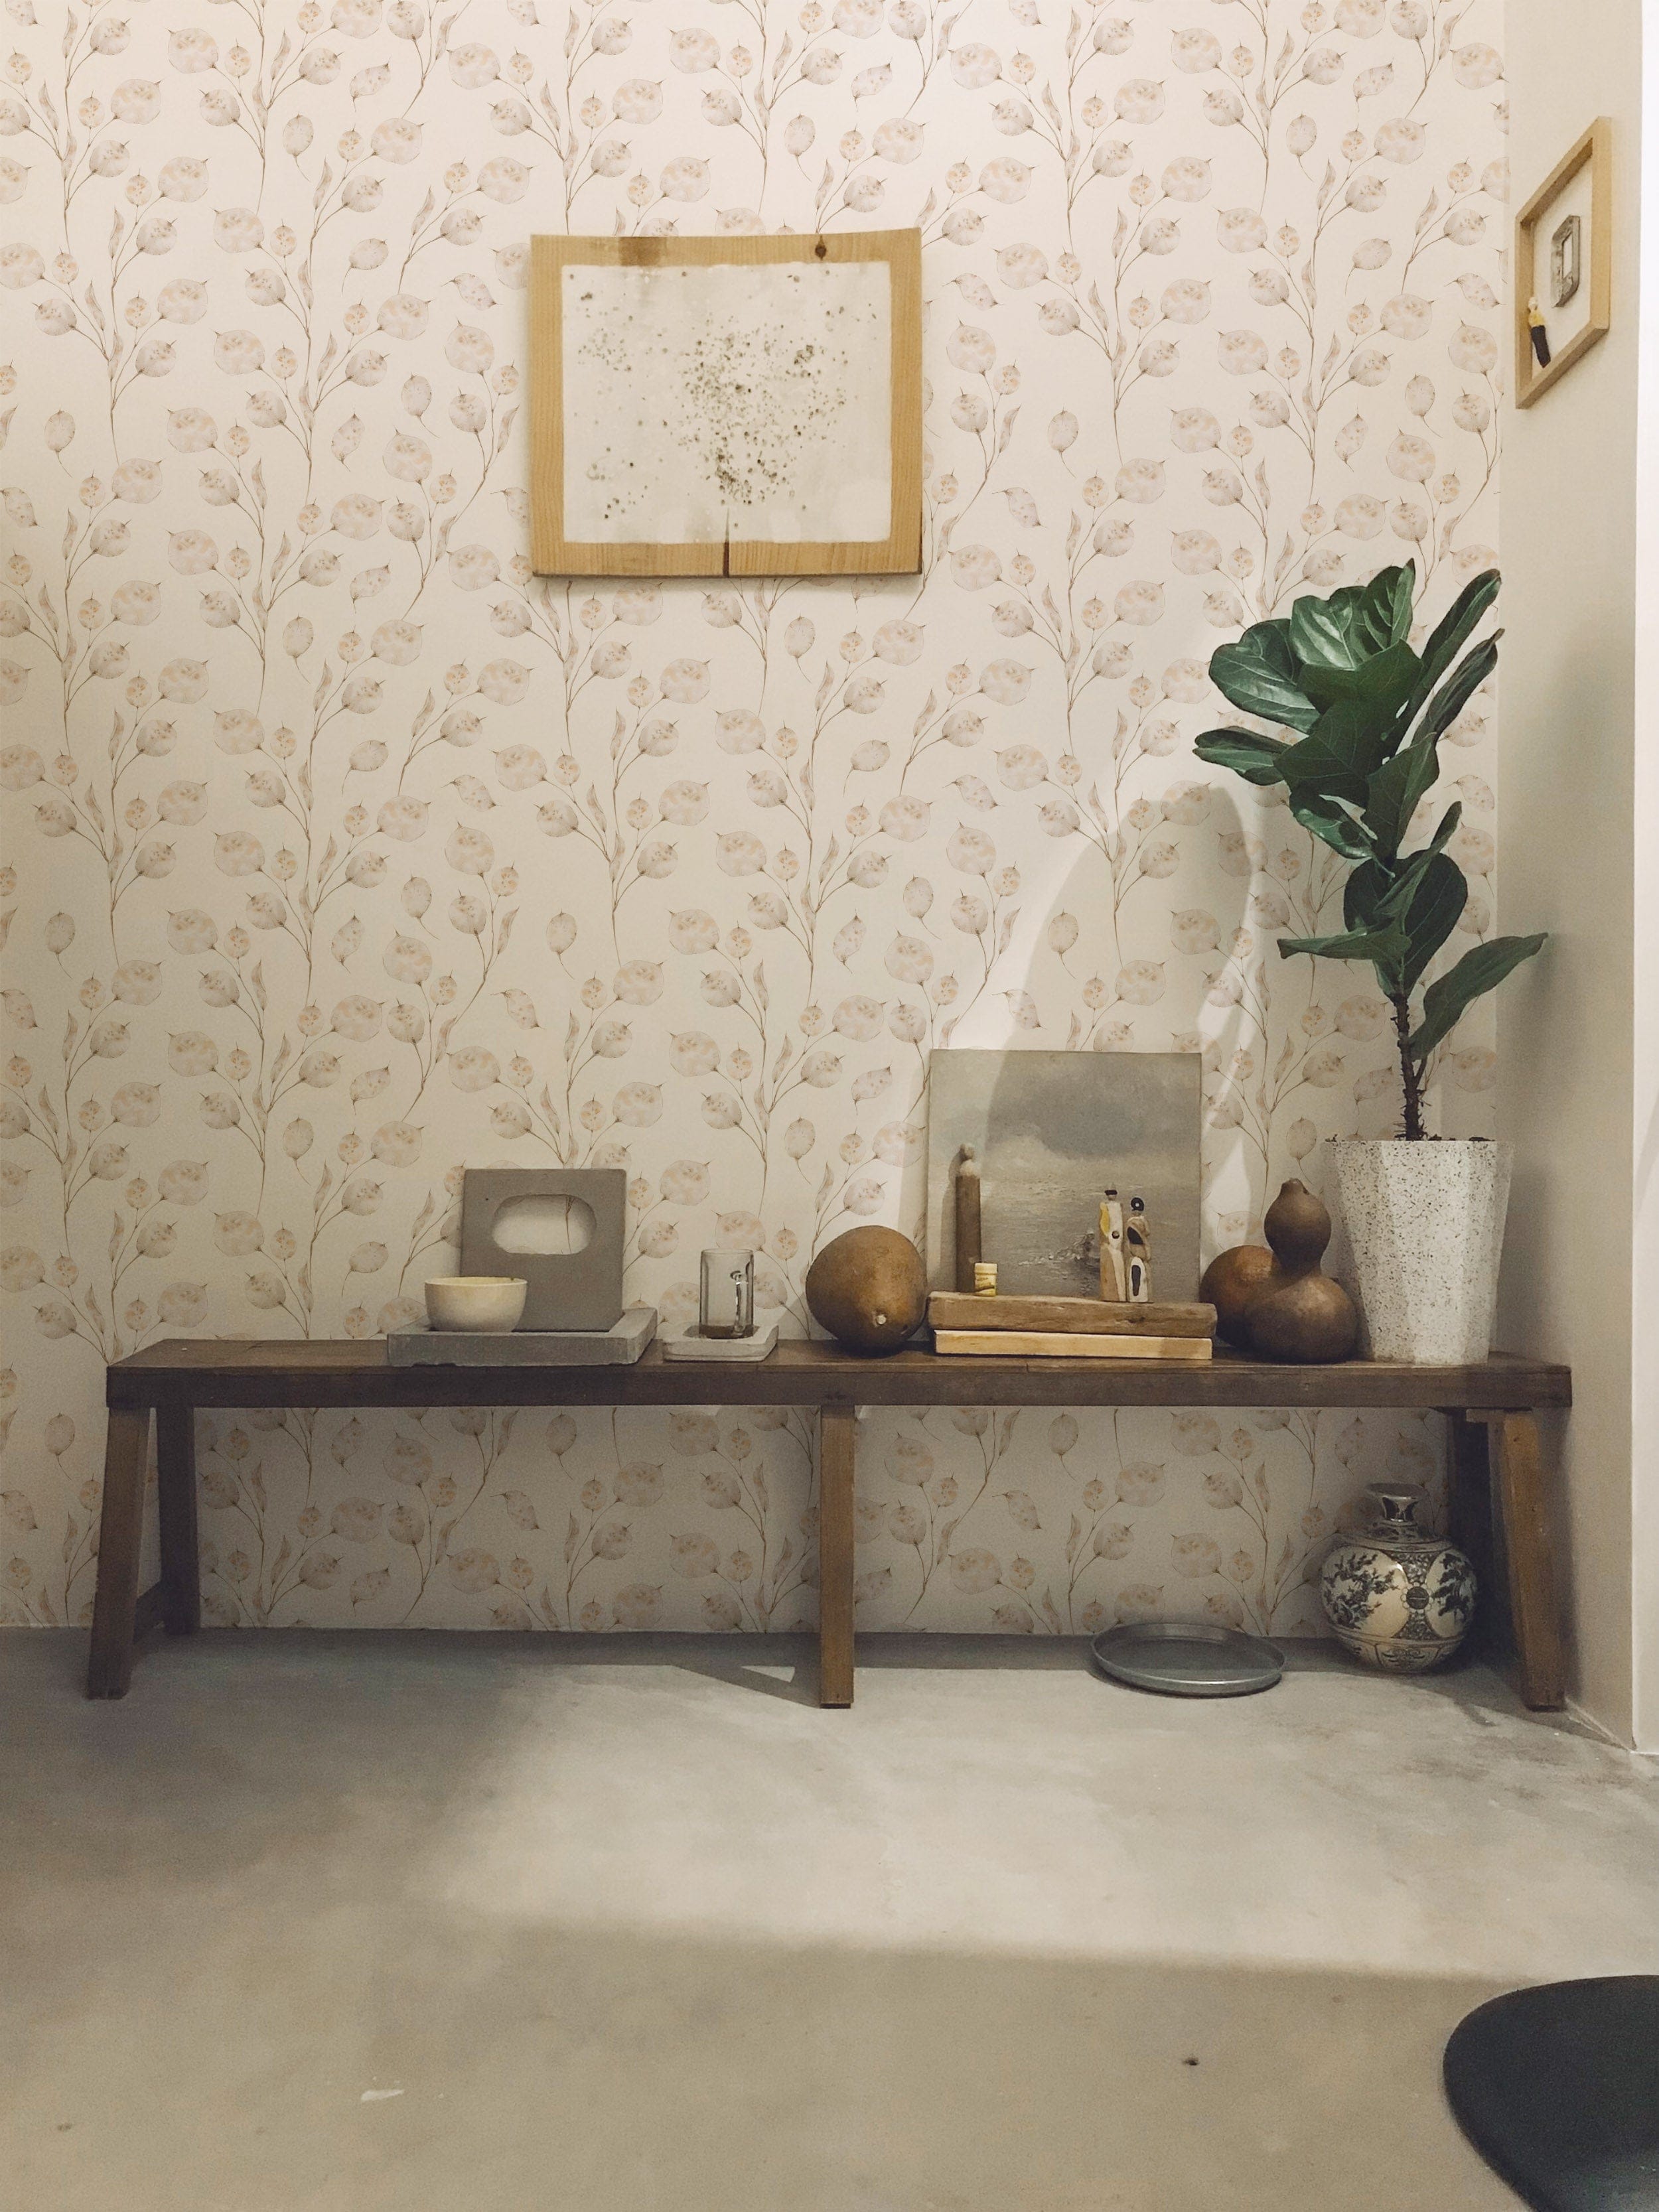 A cozy entryway featuring Winter Branches Wallpaper with delicate, beige botanical designs on a white background, accompanied by a wooden bench, a potted plant, and various decorative items.